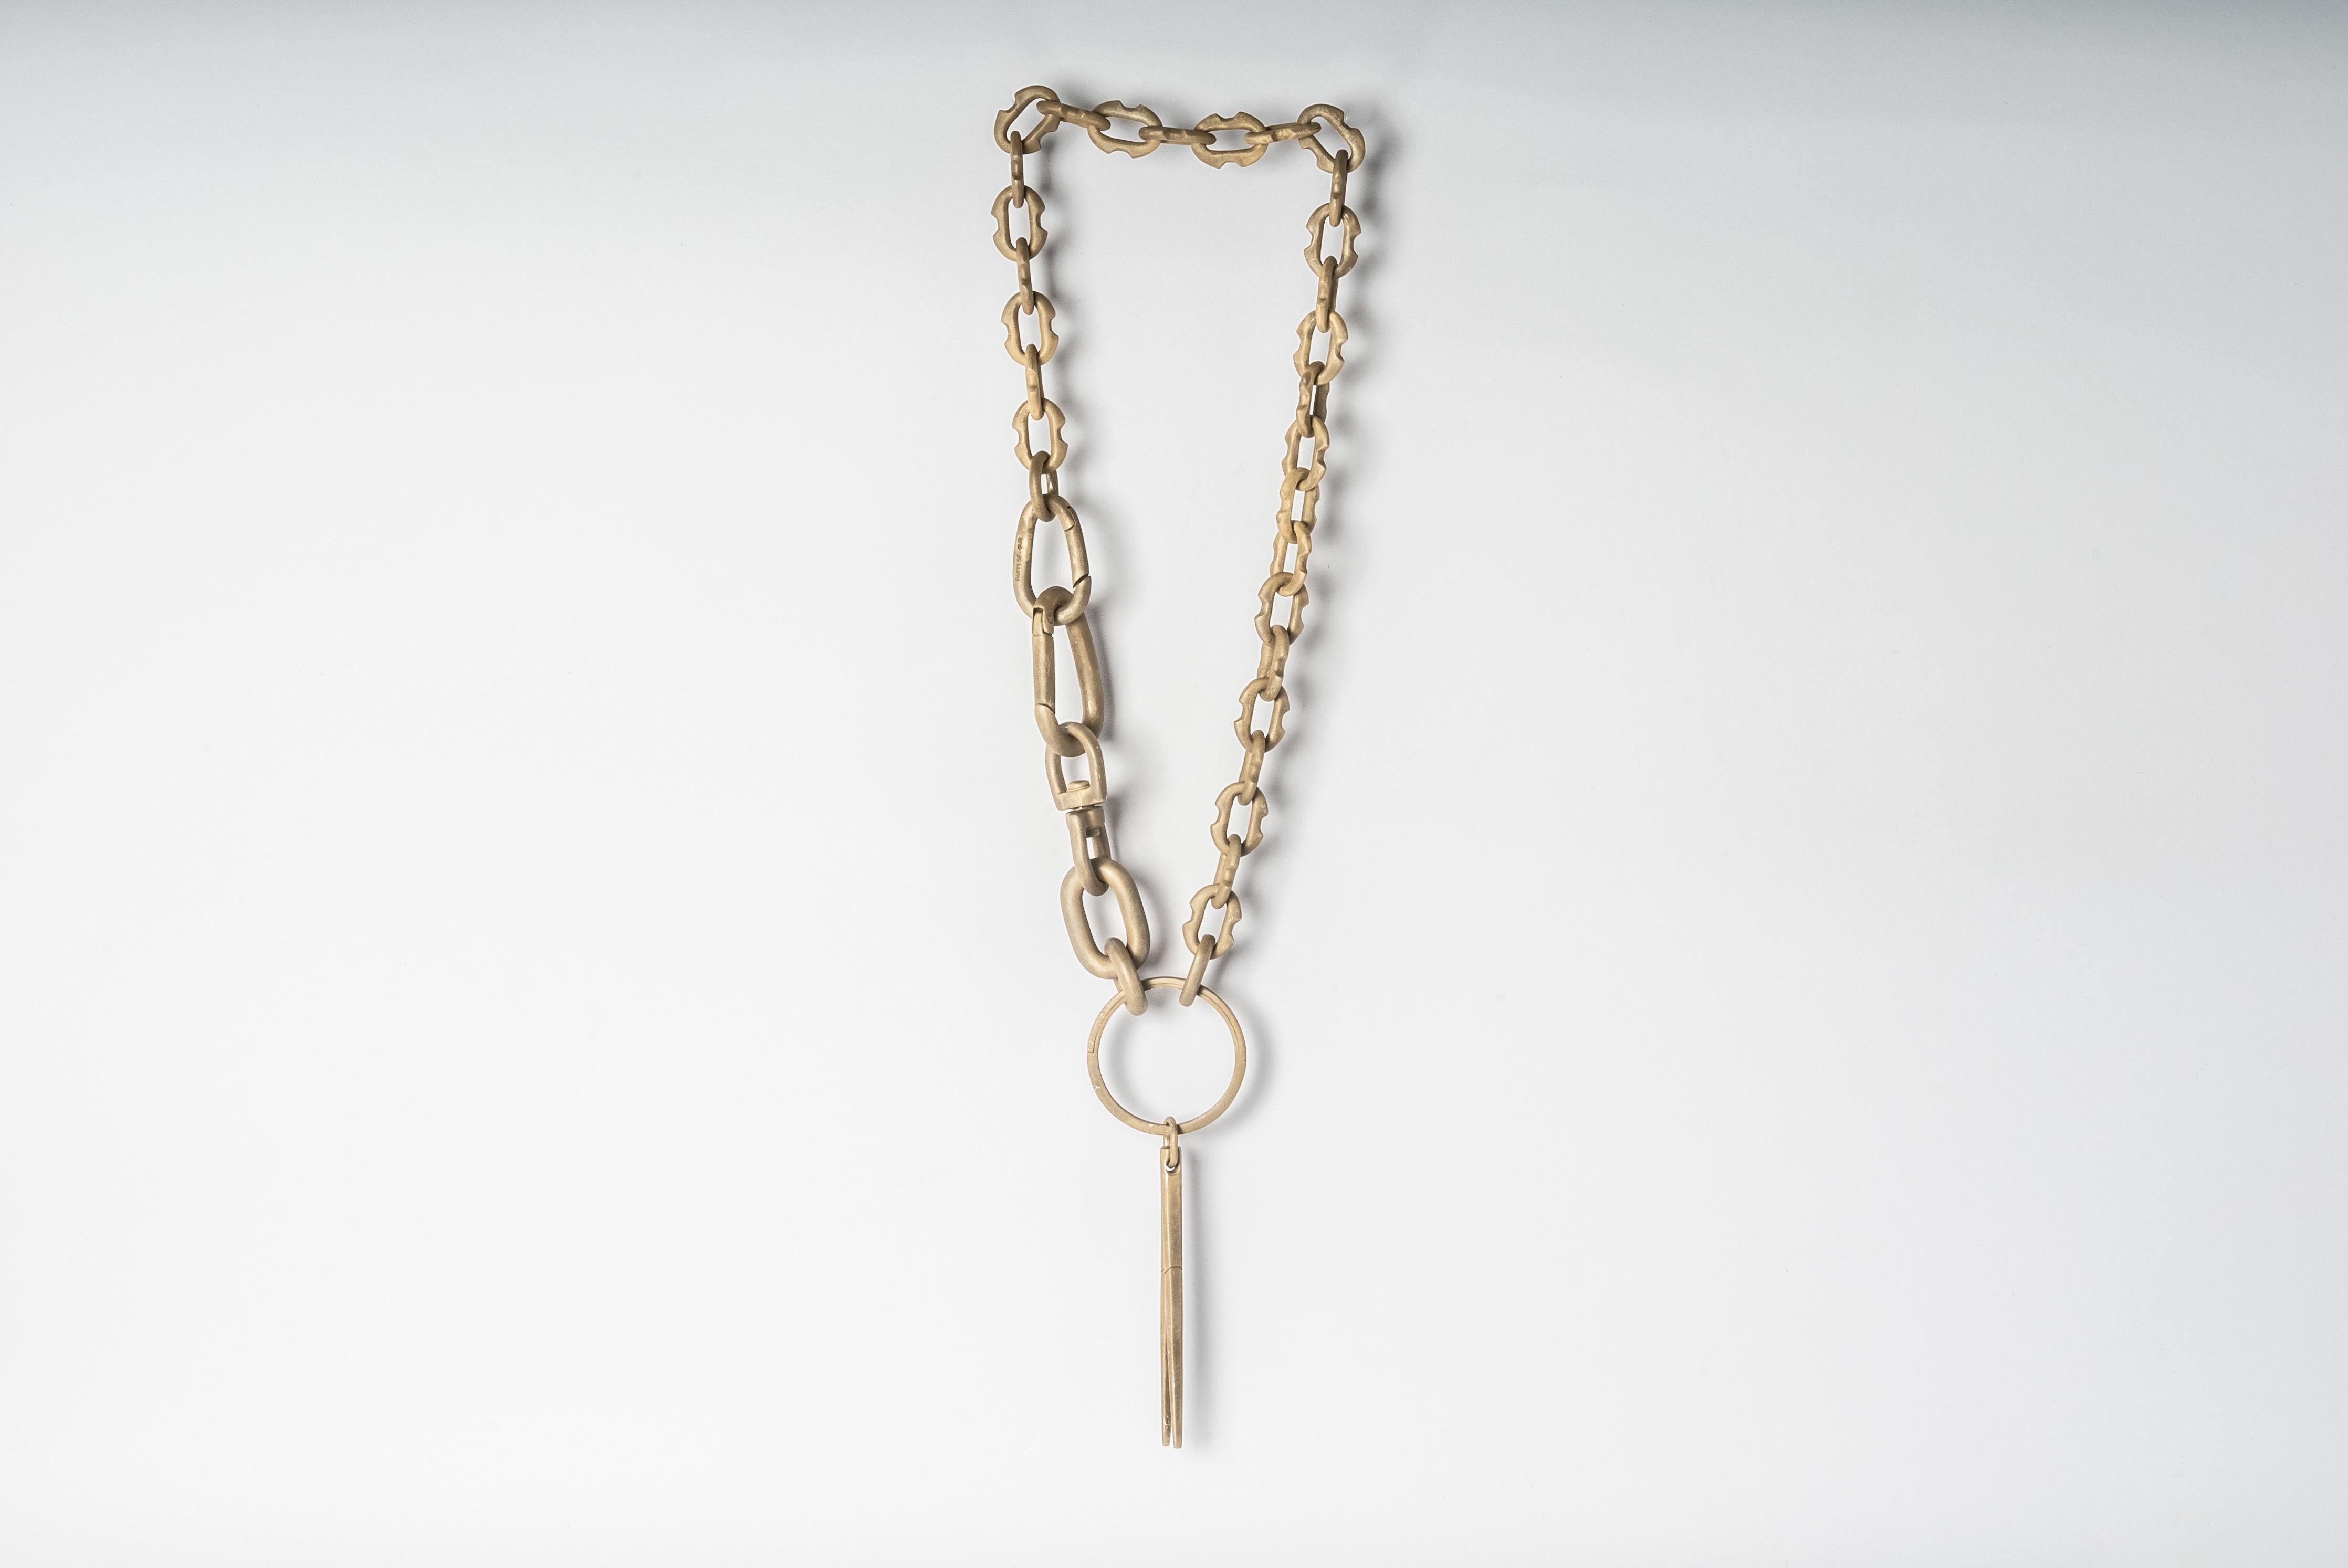 Totemic chain necklace in brass. Brass is silver plated and heavy acid treated.
Chain length (closure to closure): 580 mm